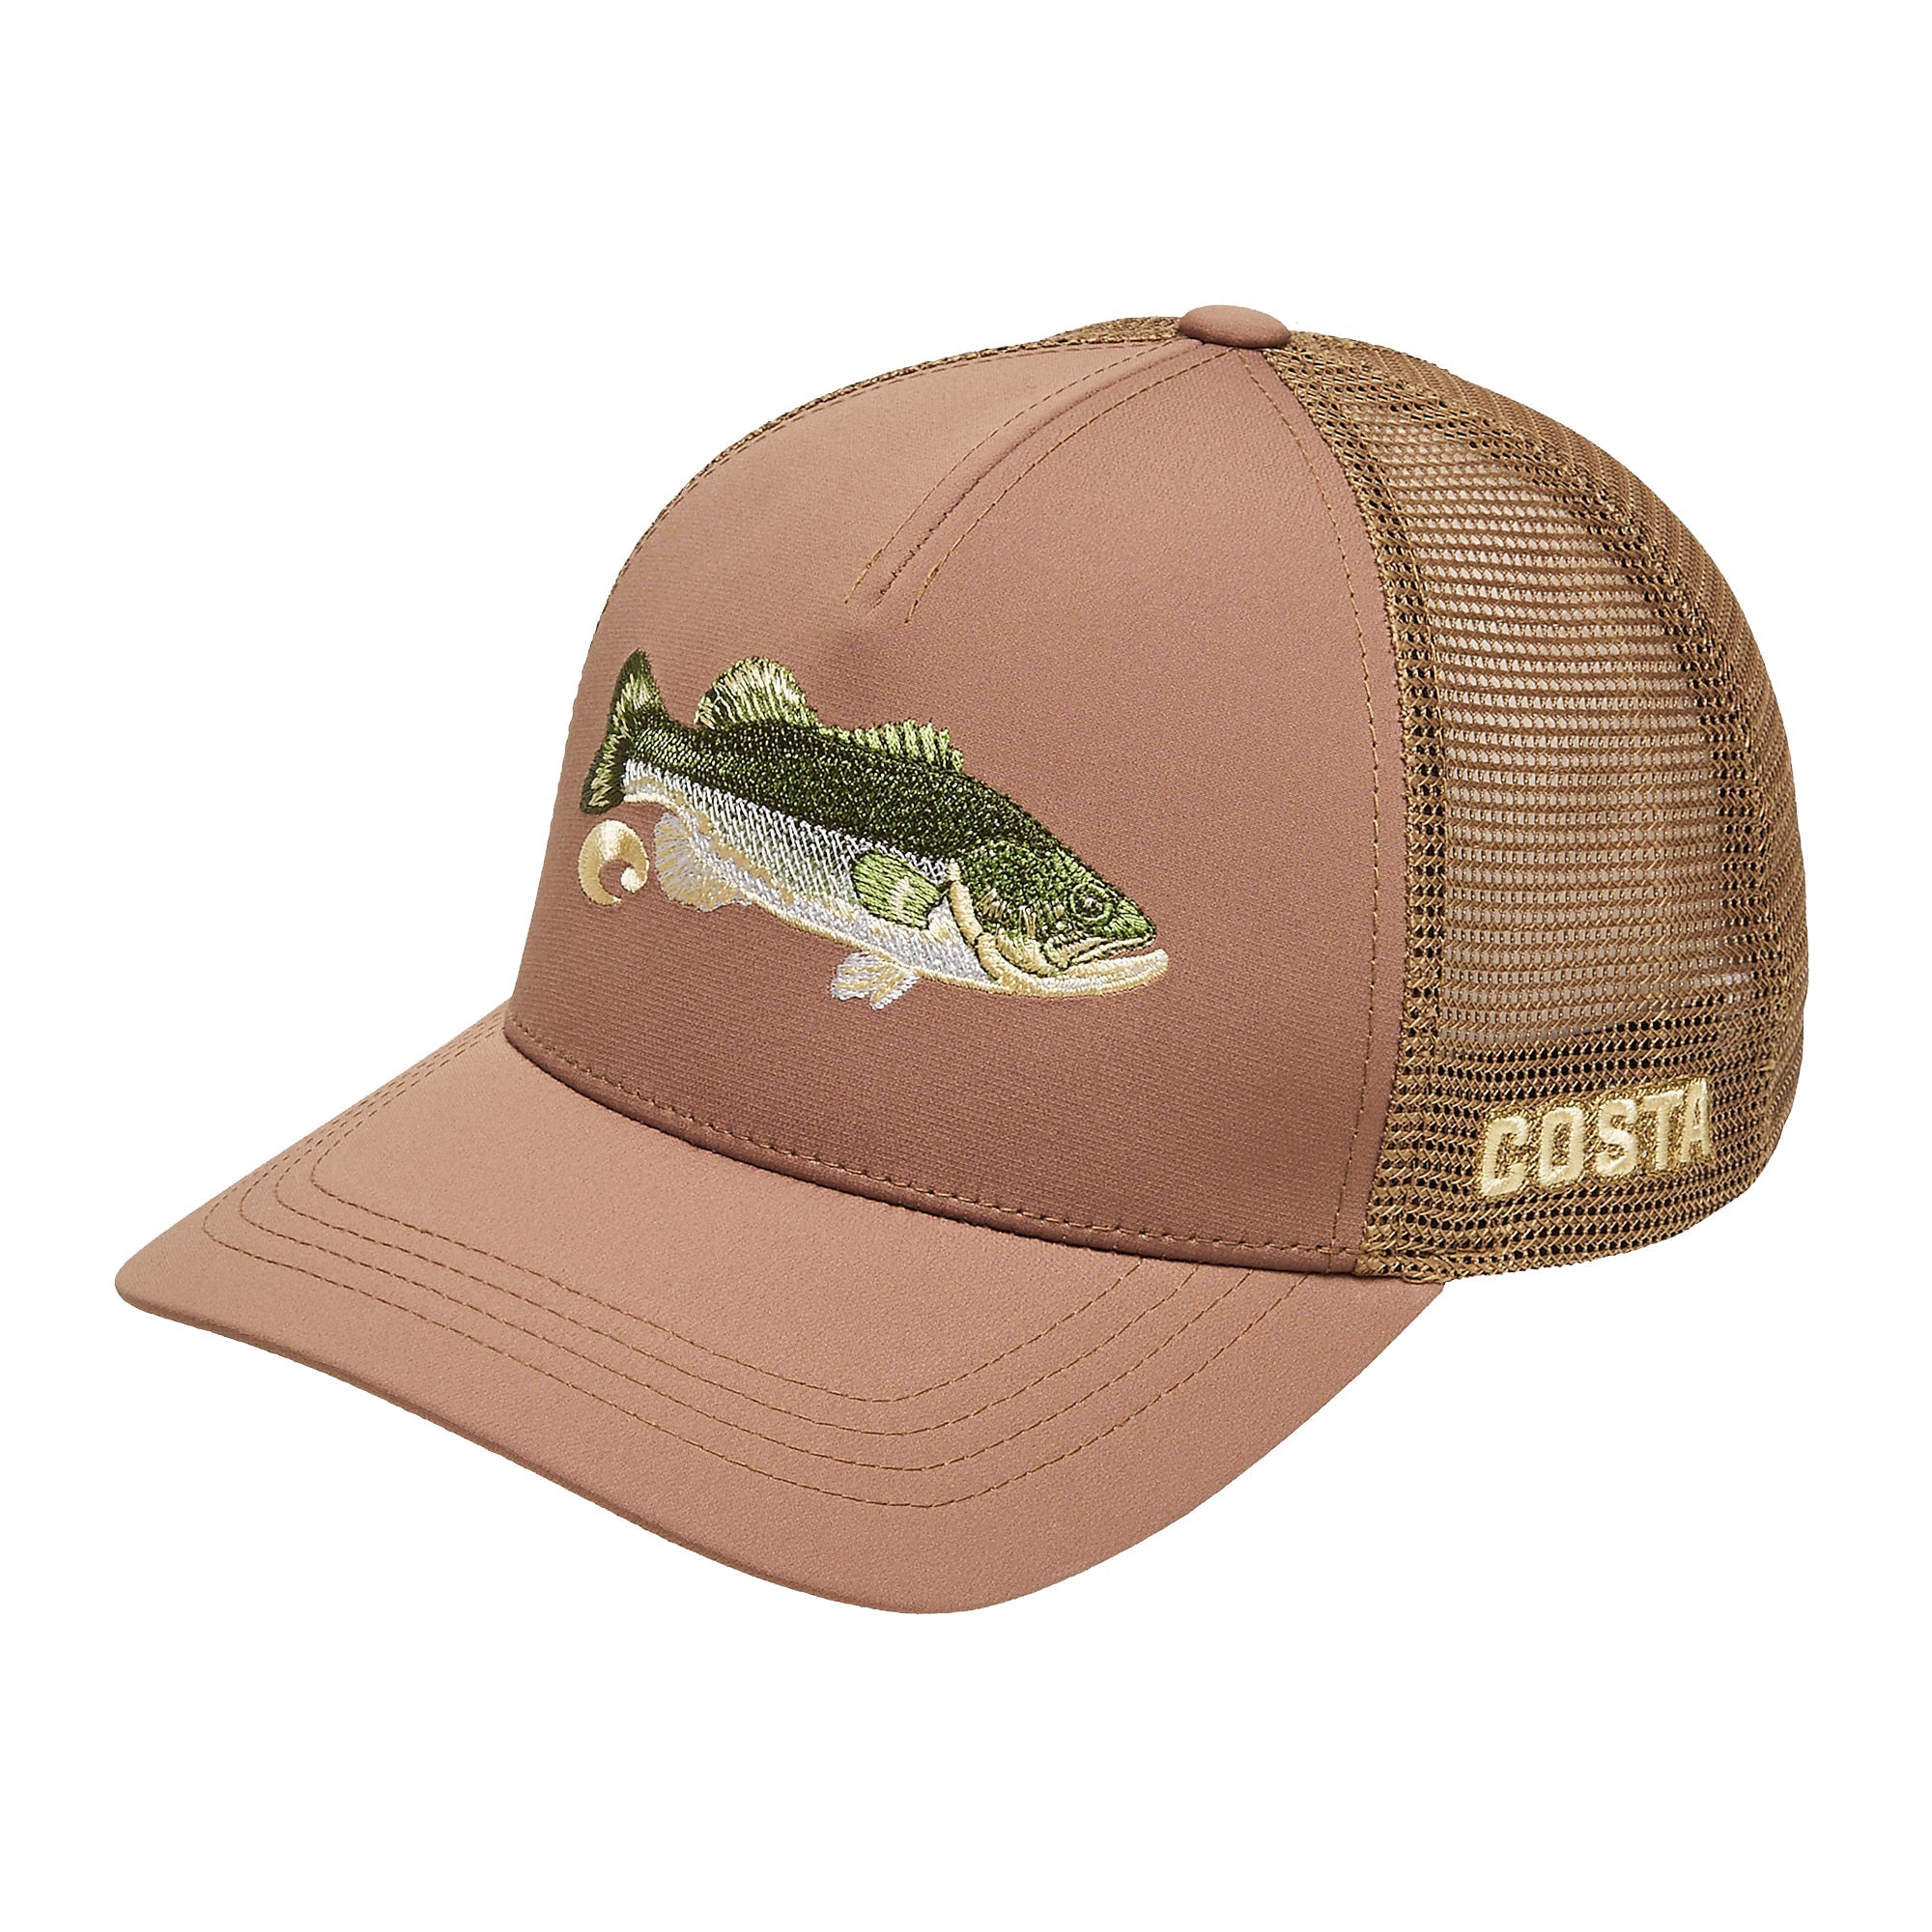 Costa Hats - Scripted USA - Navy / White - Billy's Western Wear